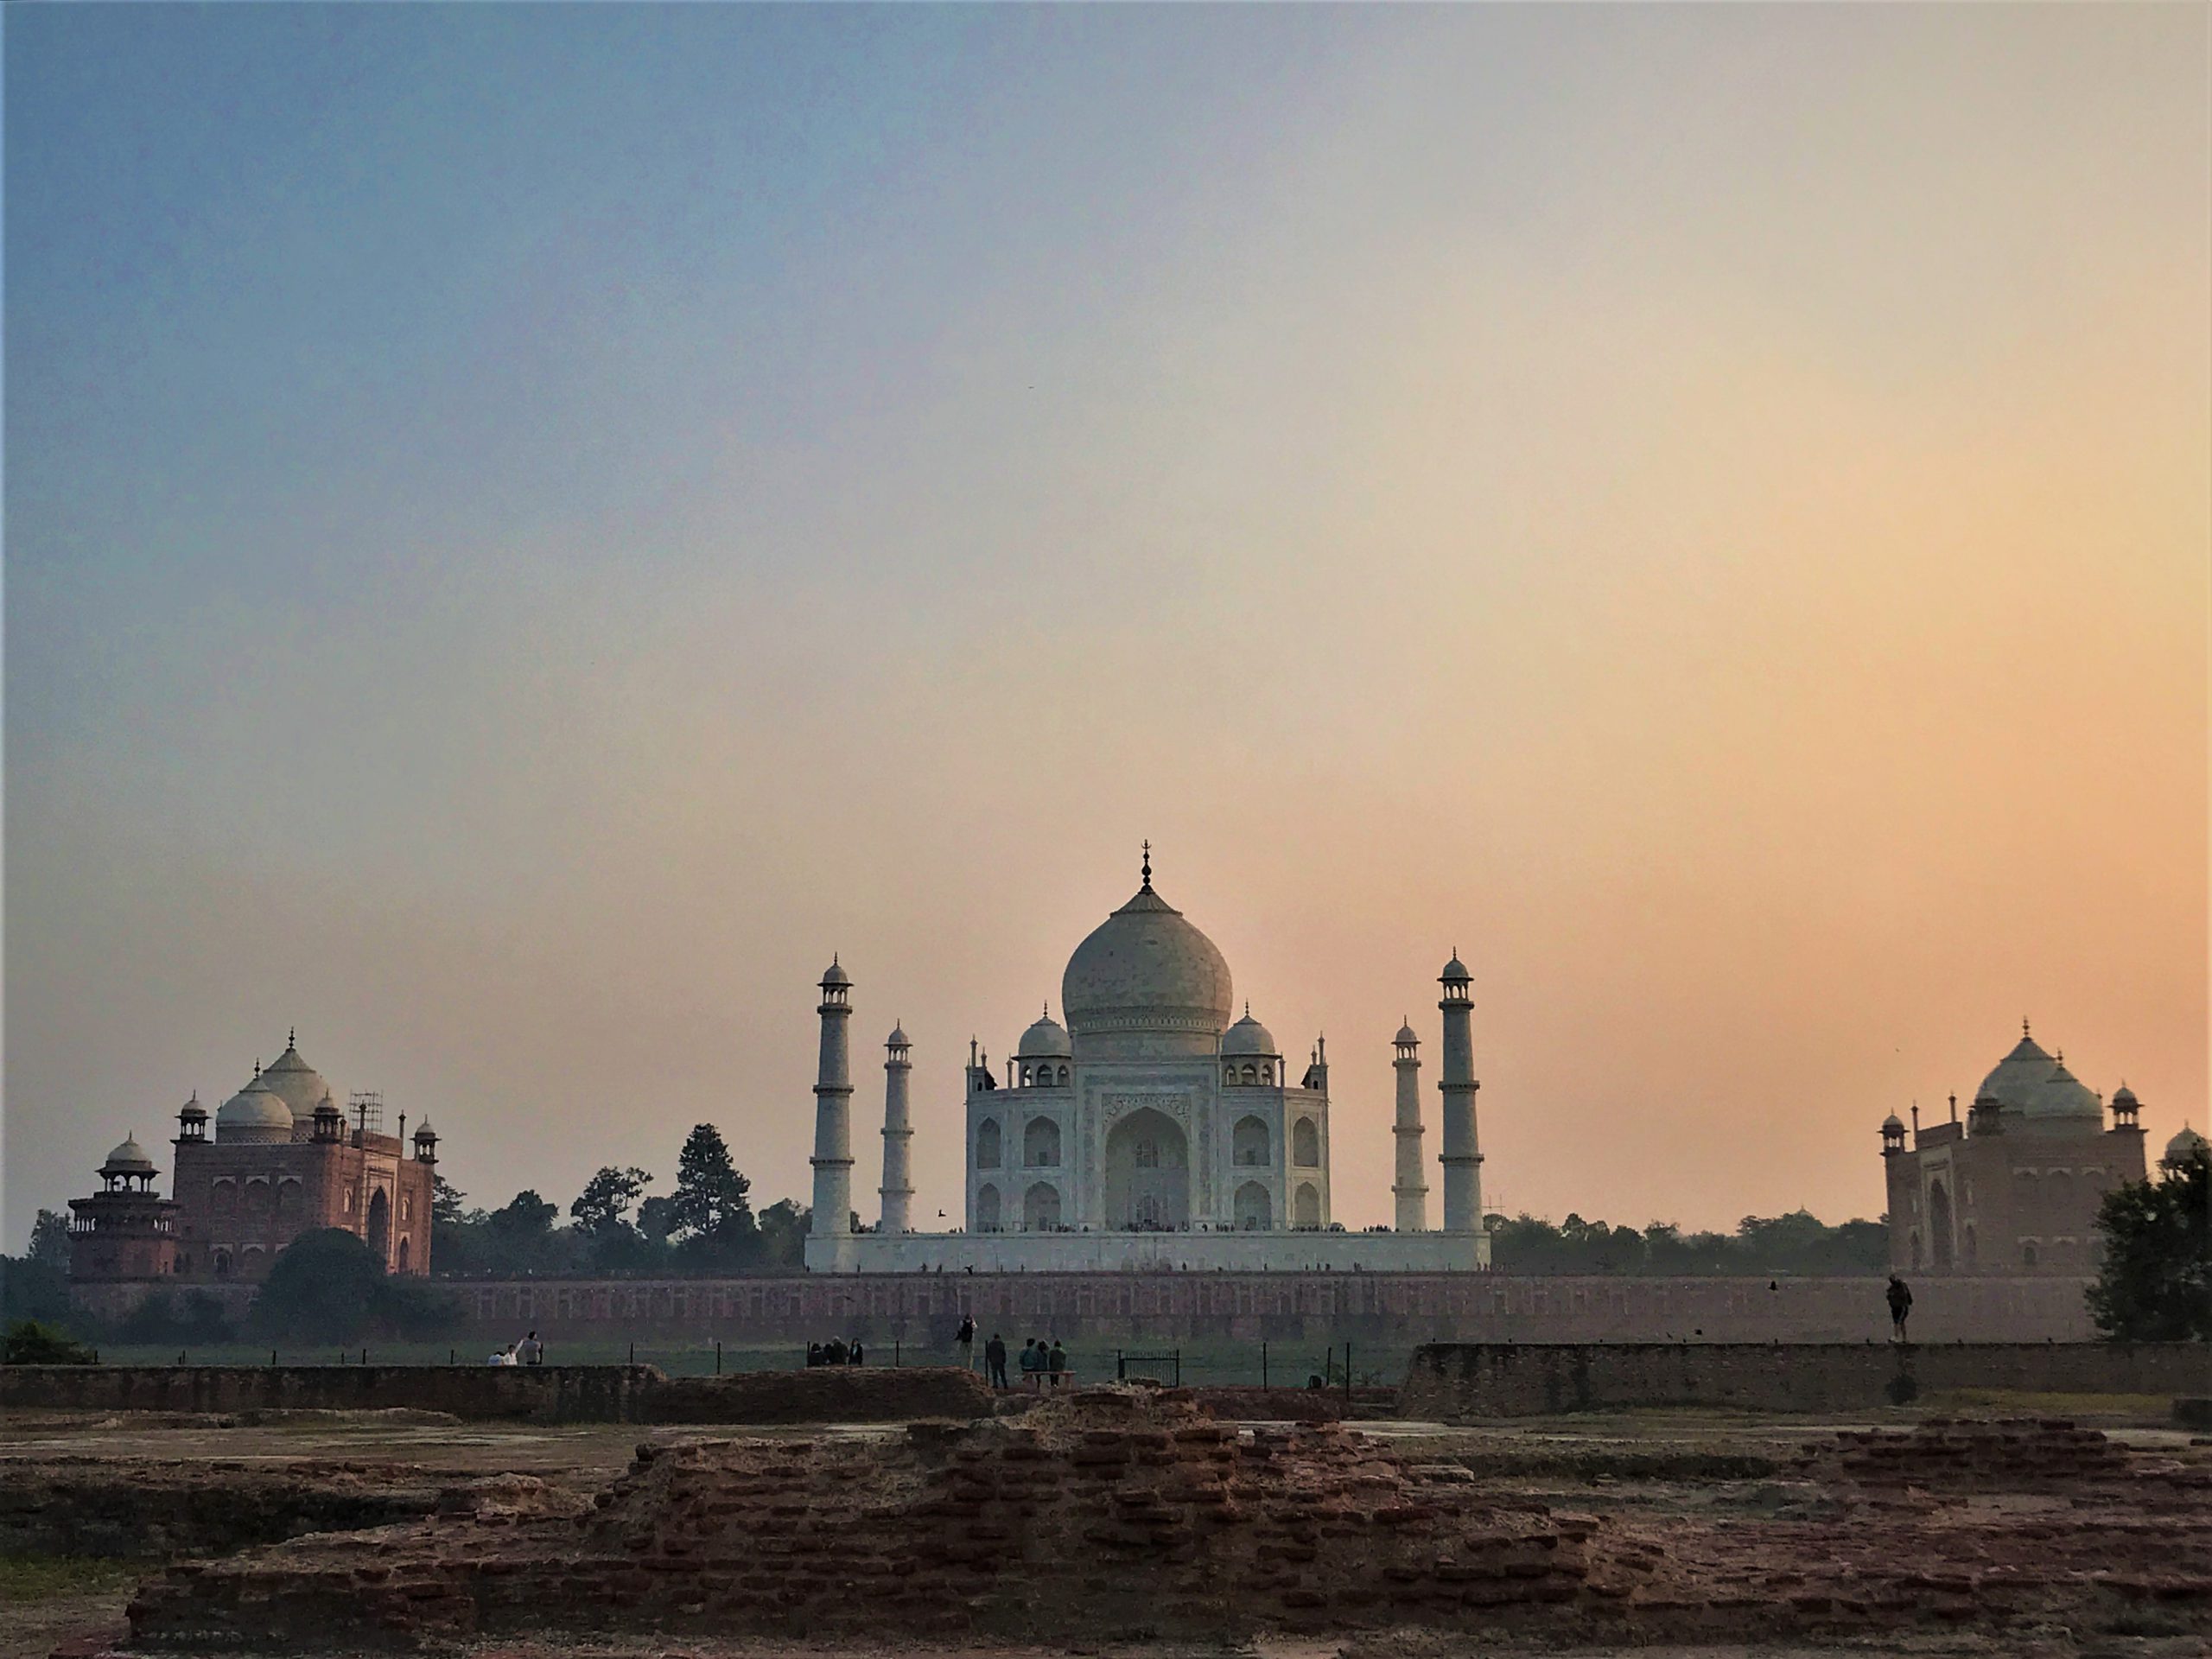 Mehtab Bagh with overview on the Taj Mahal at sunset